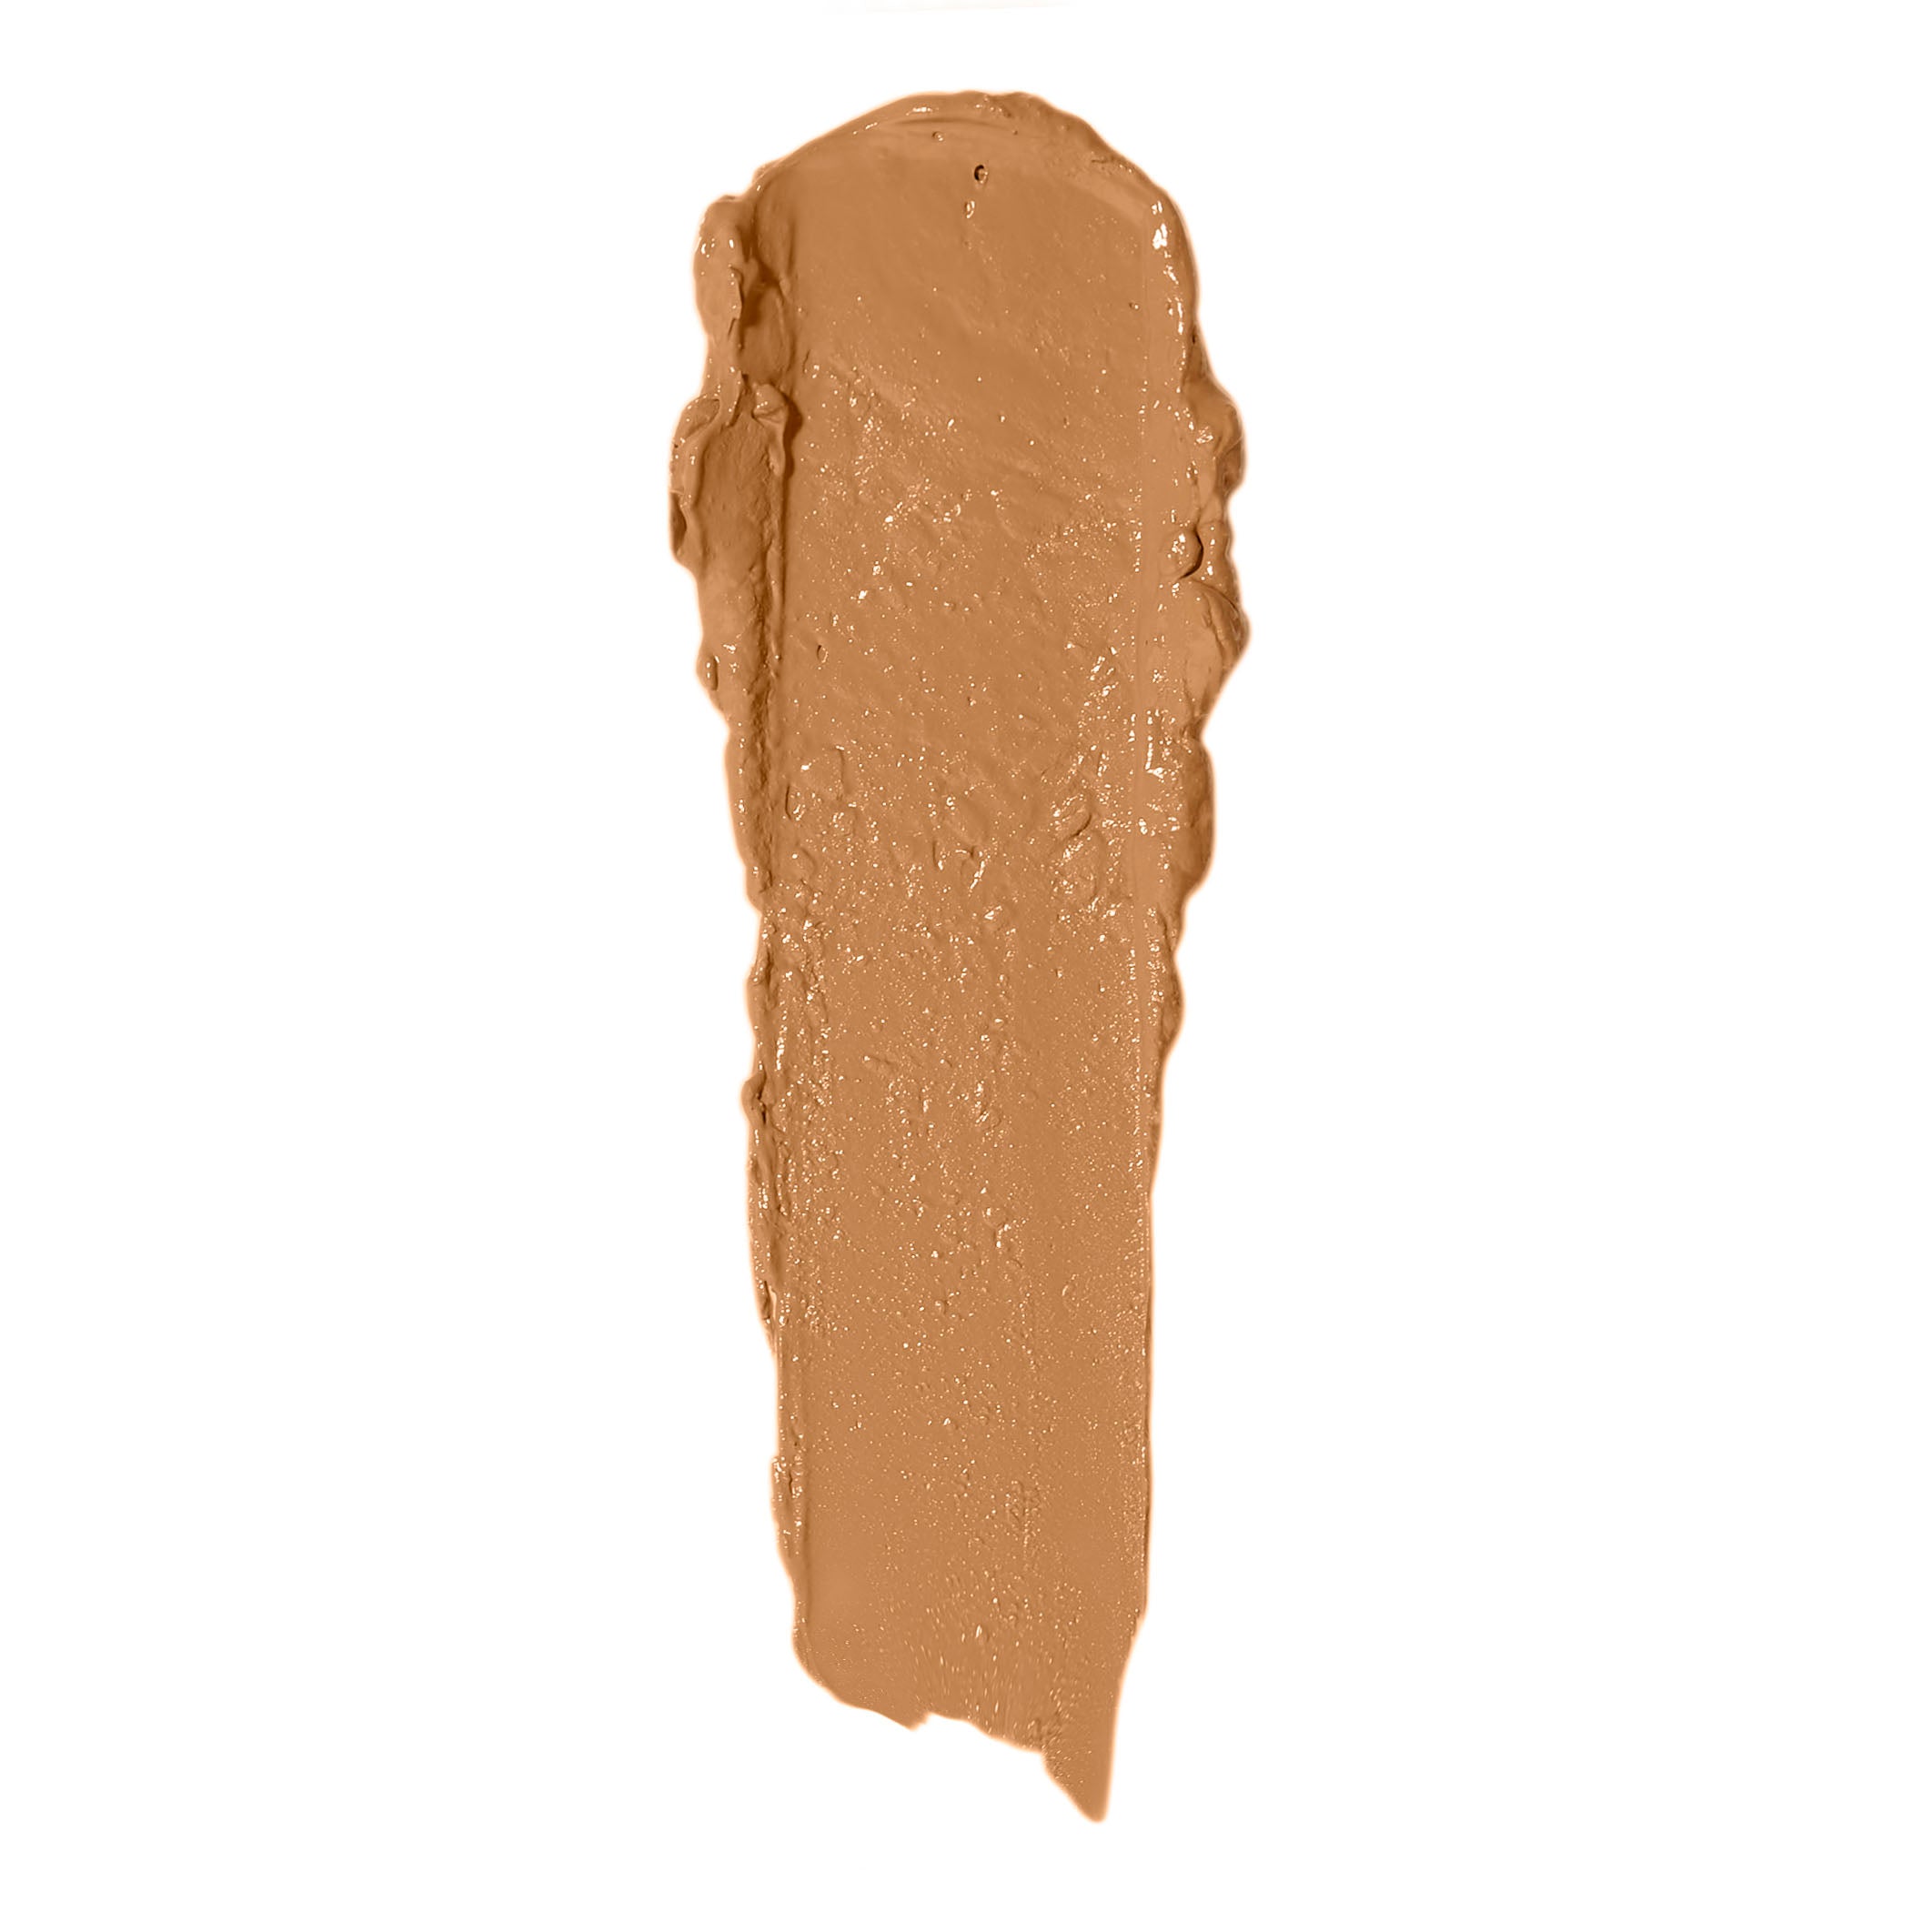 Blunder Cover an All-In-One Foundation/Concealer Shade - Fünf - 1